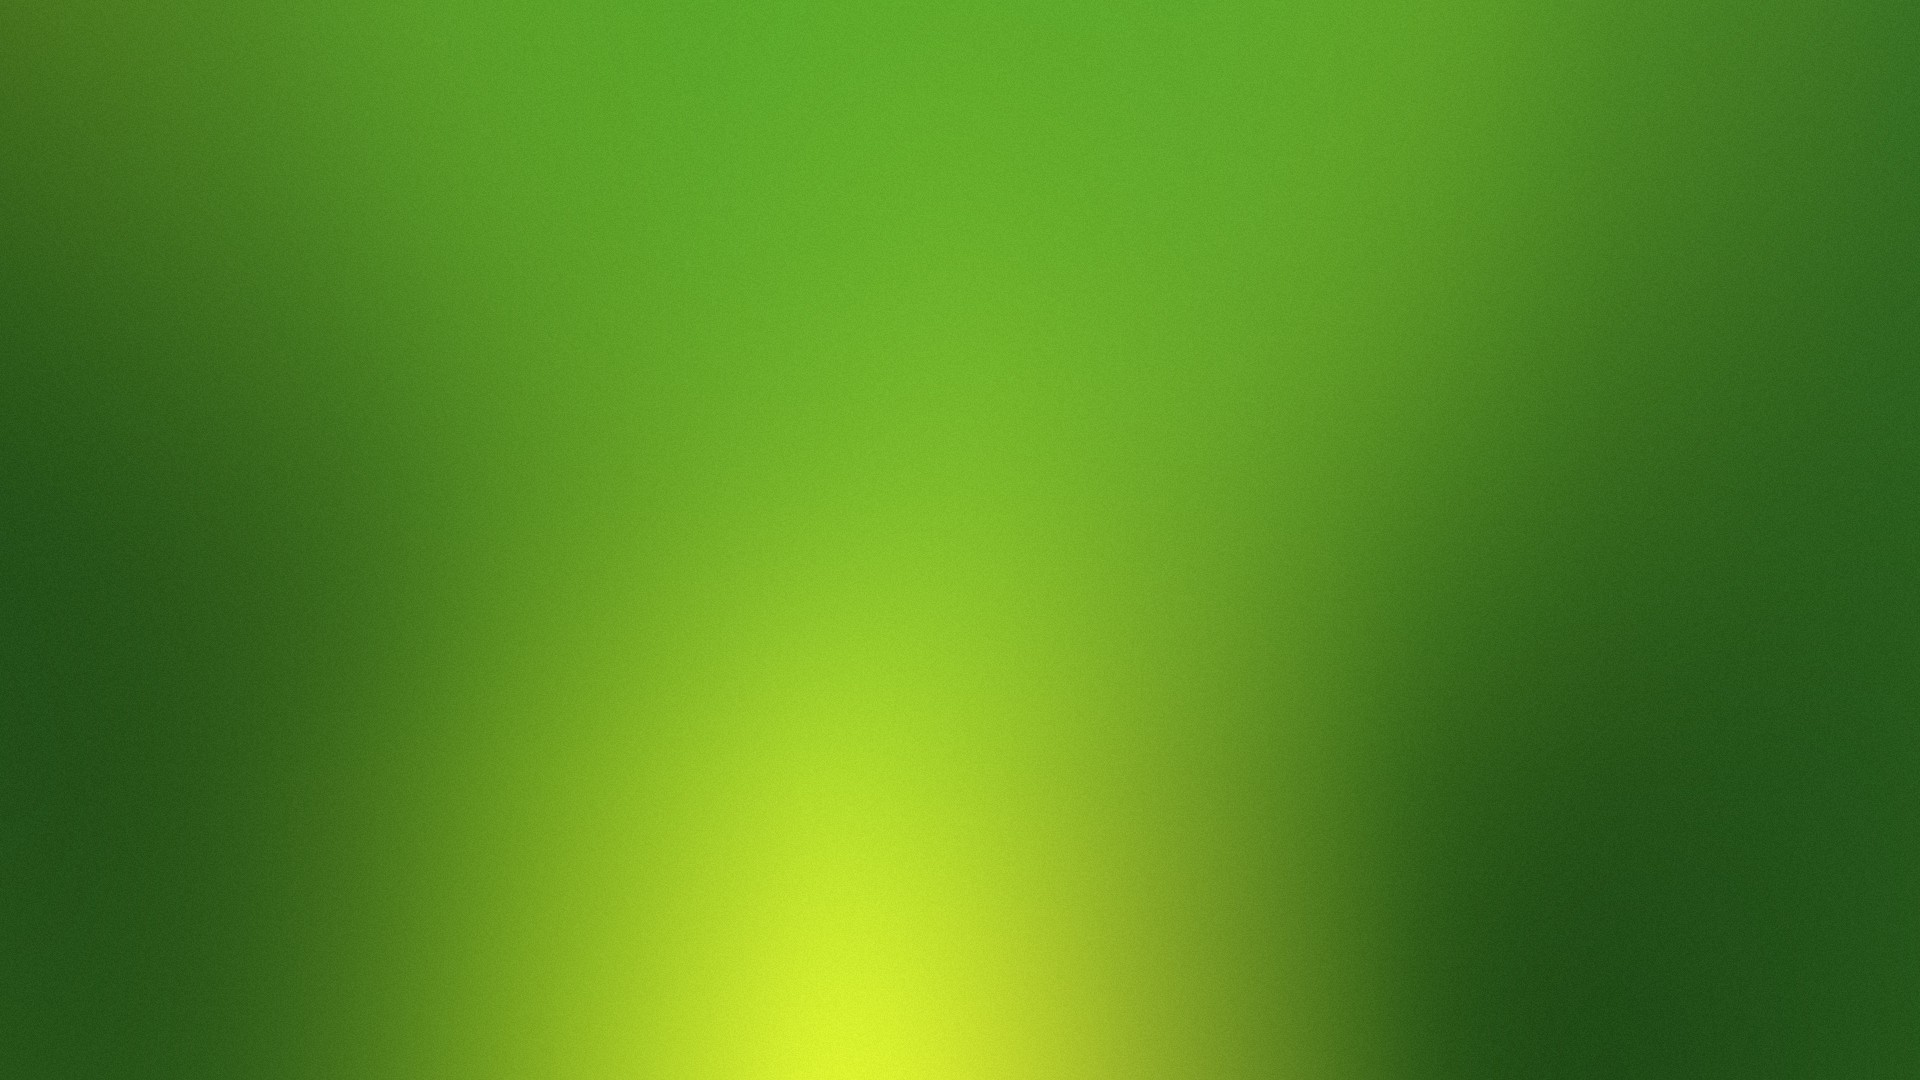 Wallpaper HD Green Neon With Resolution 1920X1080 pixel. You can make this wallpaper for your Desktop Computer Backgrounds, Mac Wallpapers, Android Lock screen or iPhone Screensavers